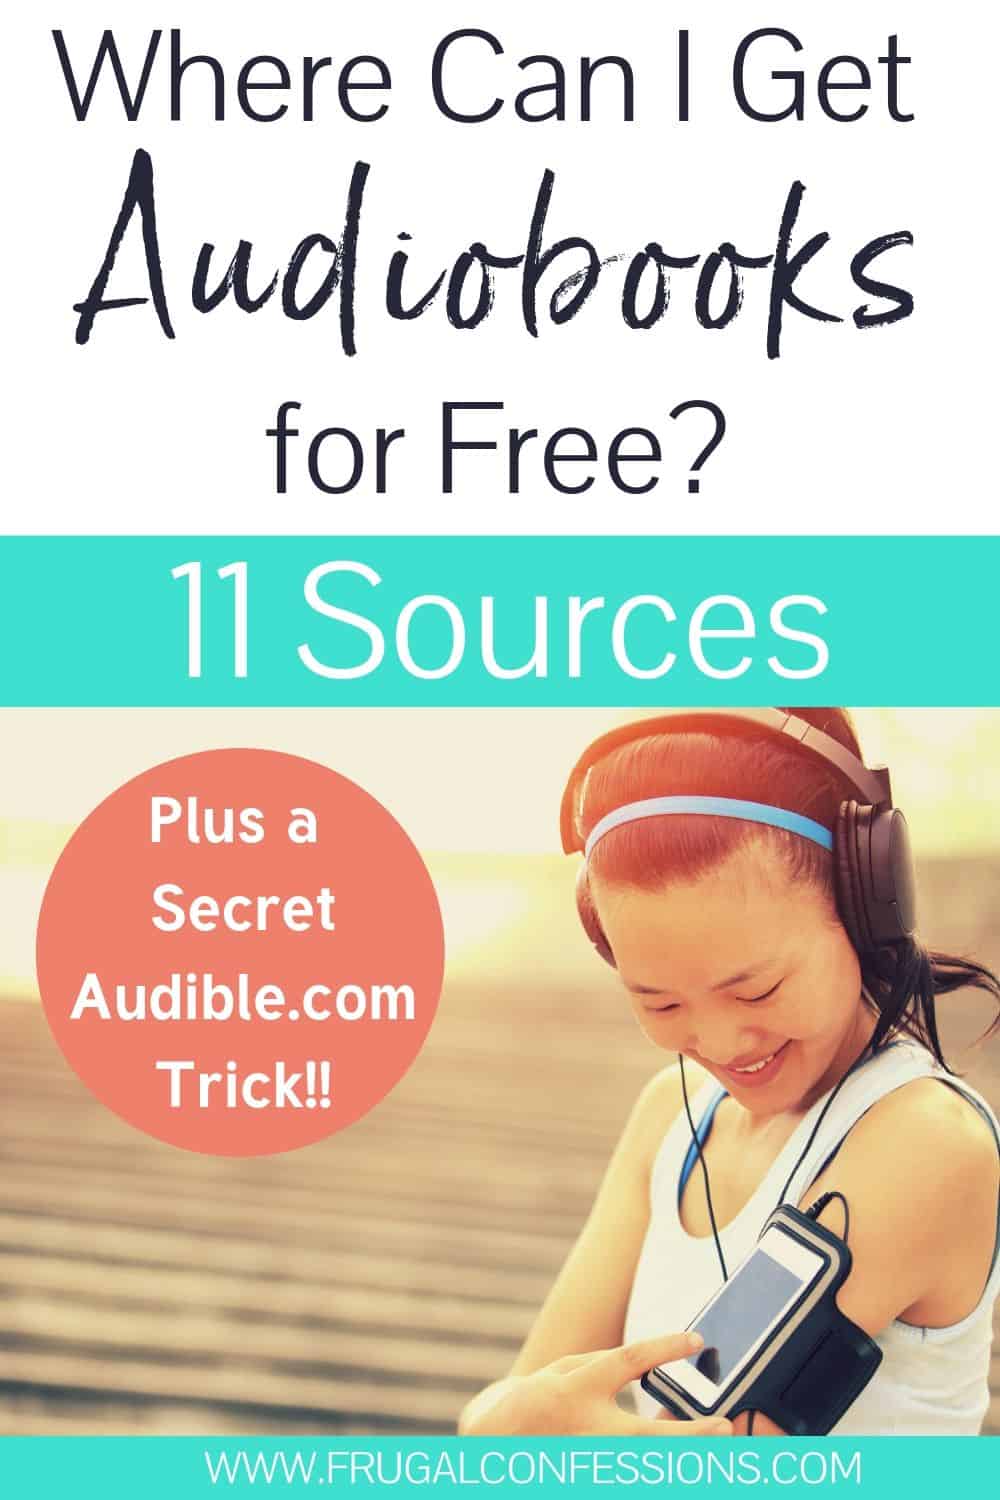 How can I get full audiobooks for free?